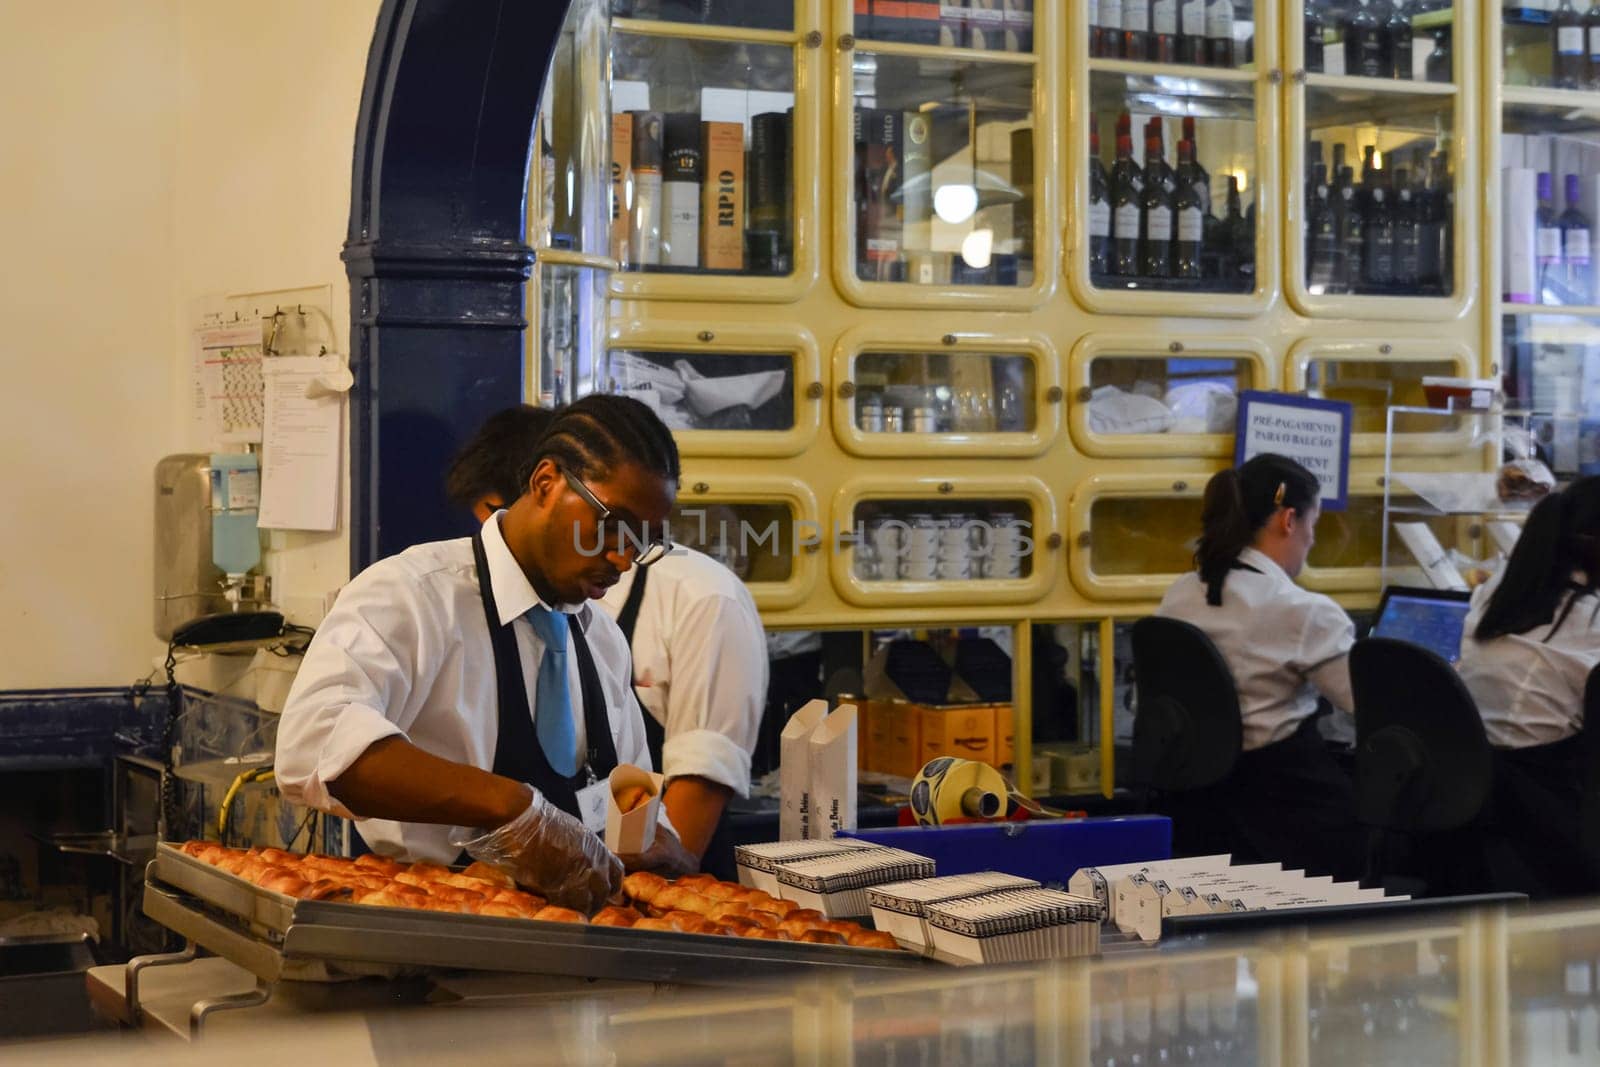 The worker fills the boxes Pasteis de Belem in the historical pastry store in Lisbon. by Godi